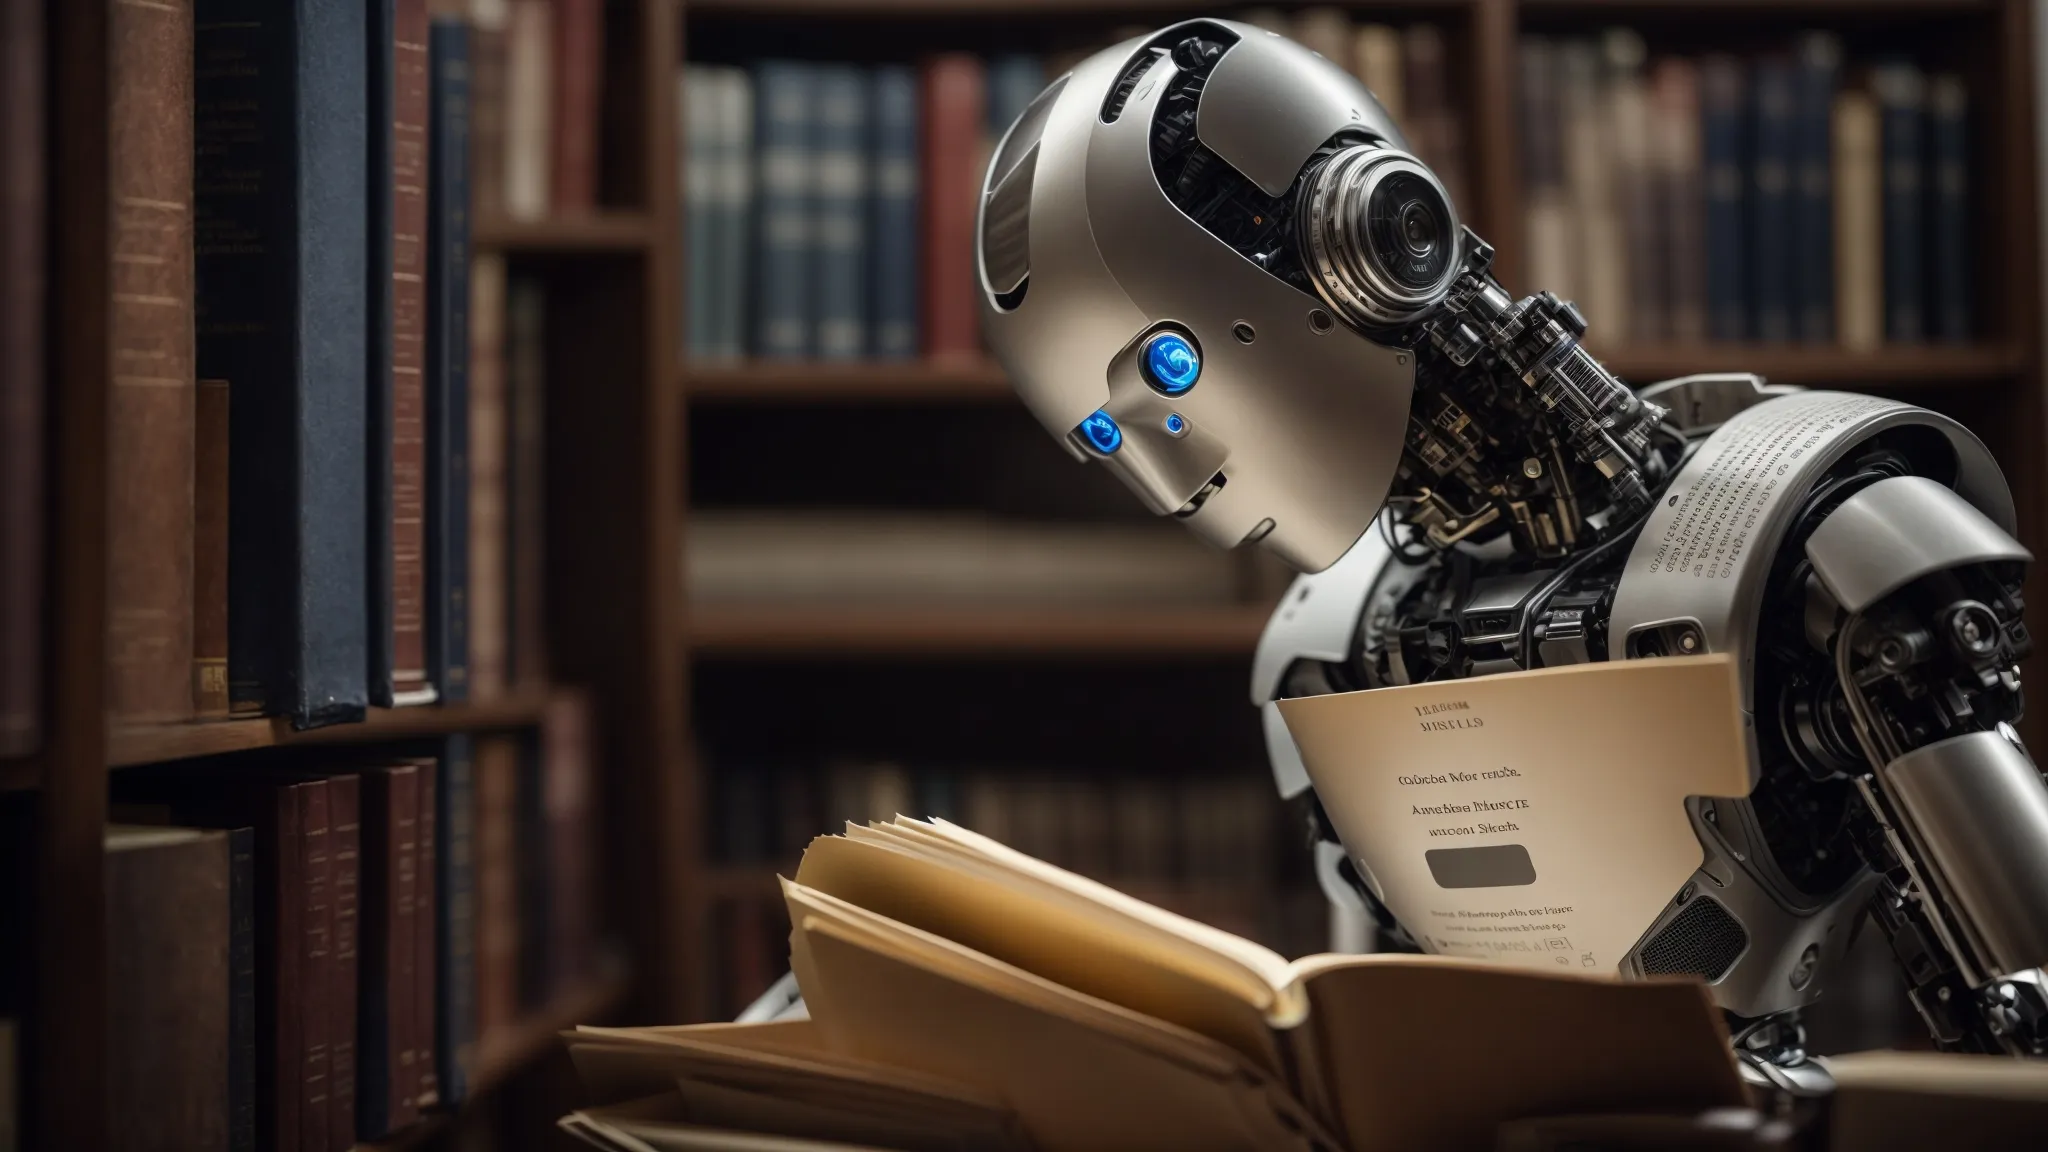 a humanoid robot intently examining a book in a library setting.